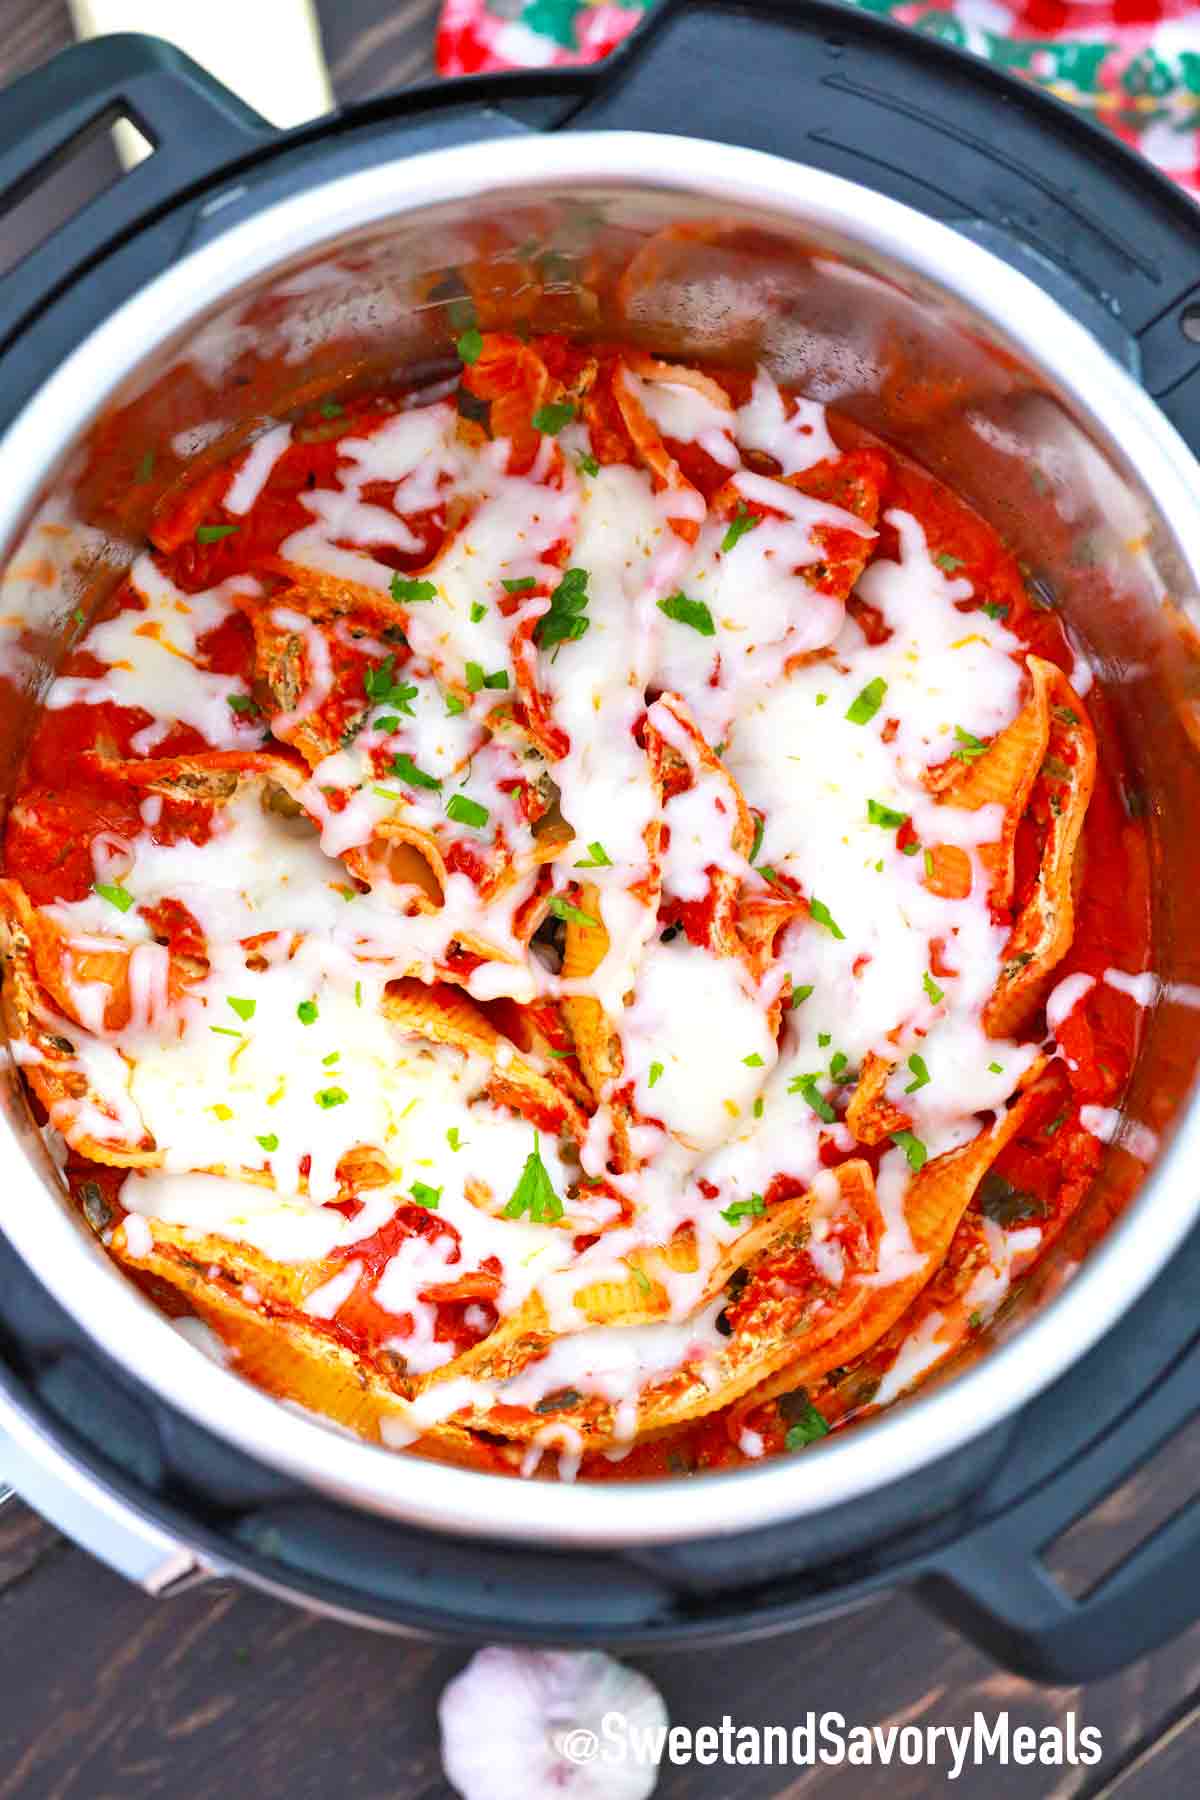 Instant Pot Stuffed Shells Recipe [Video] - Sweet and Savory Meals